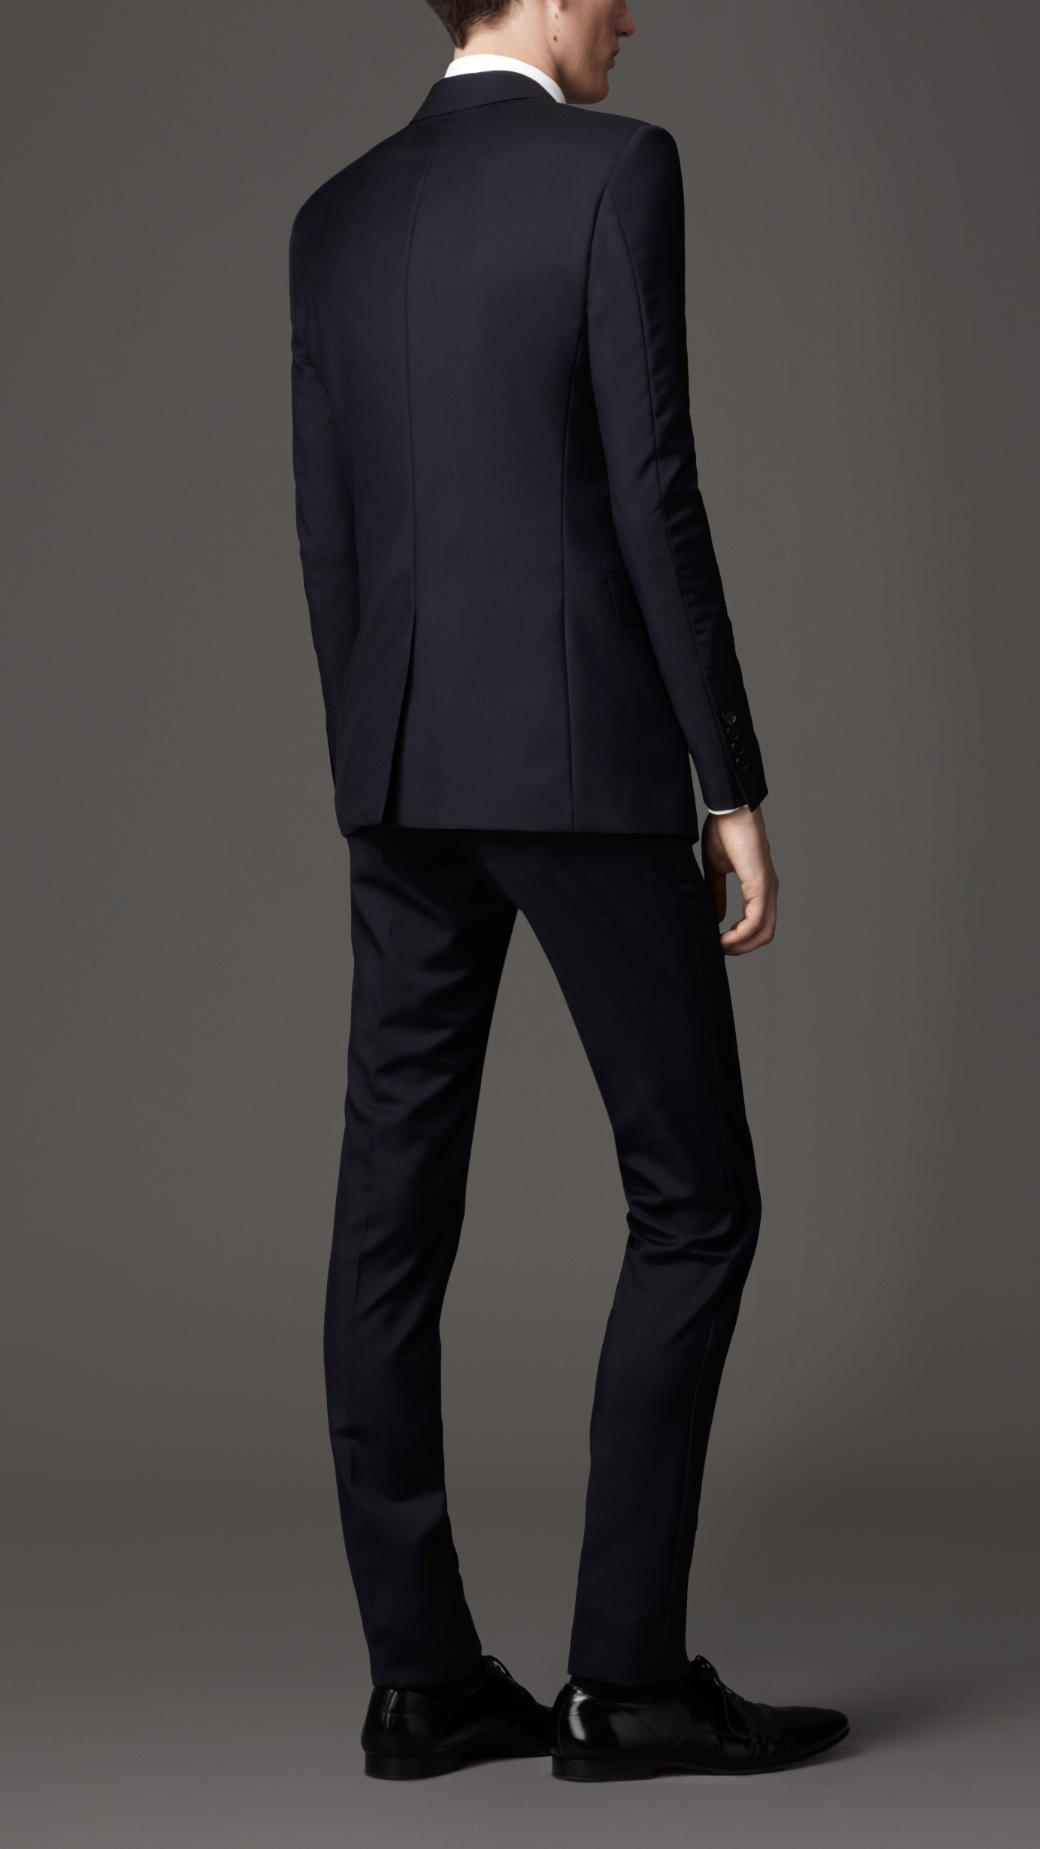 Lyst - Burberry Slim Fit Wool Mohair Suit in Blue for Men